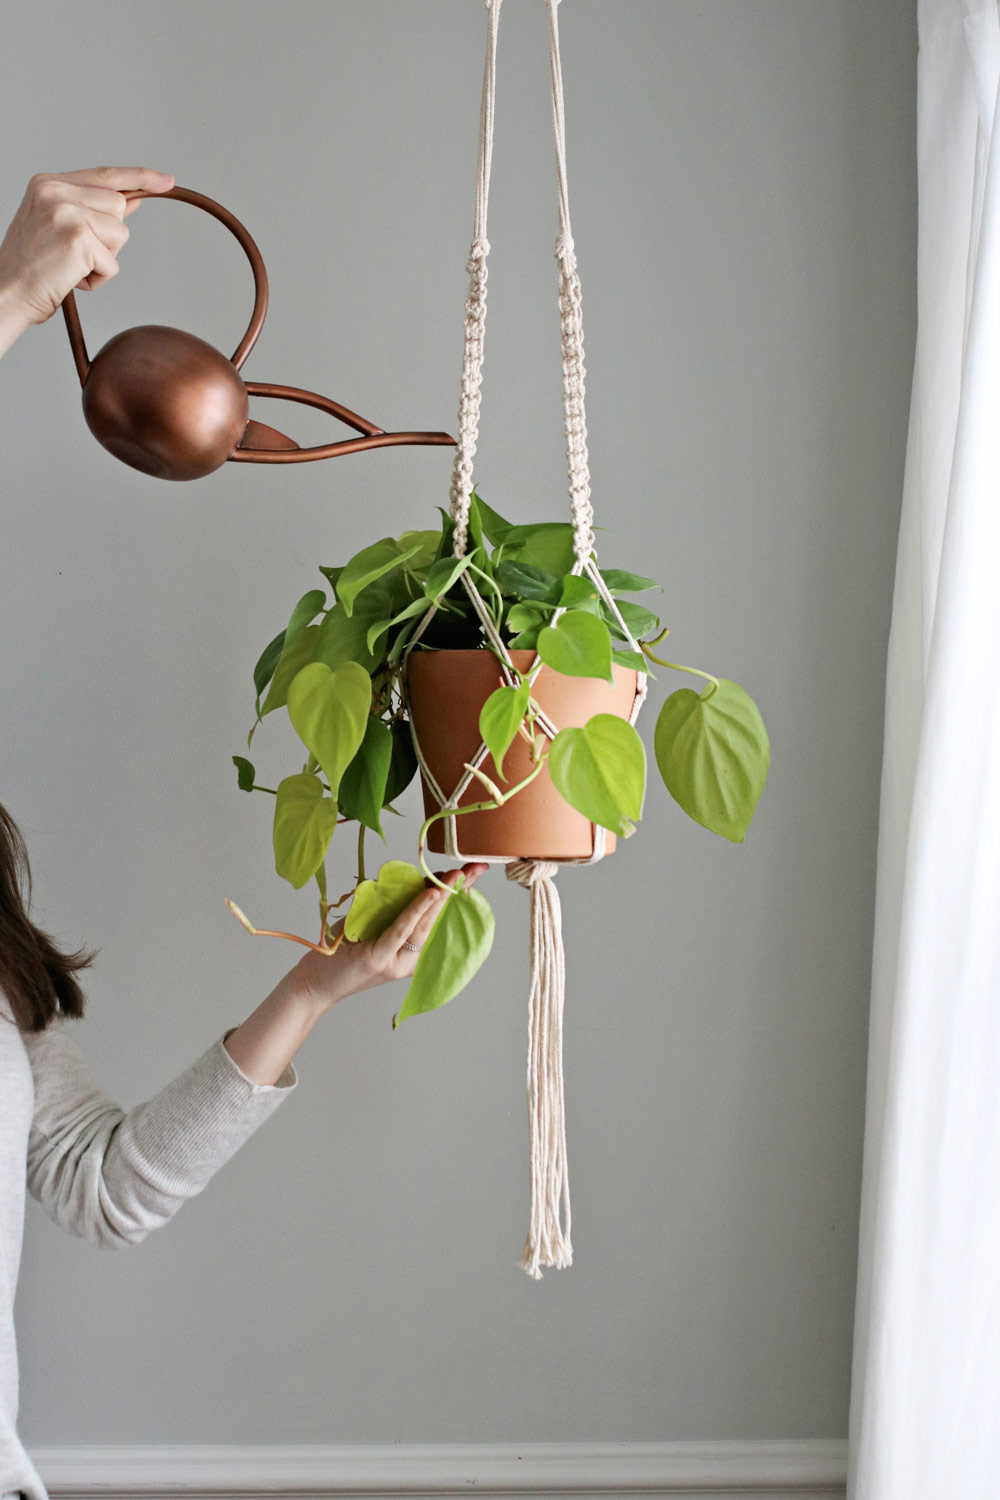 16 Chic DIY Plant Hanger Ideas For Any Space